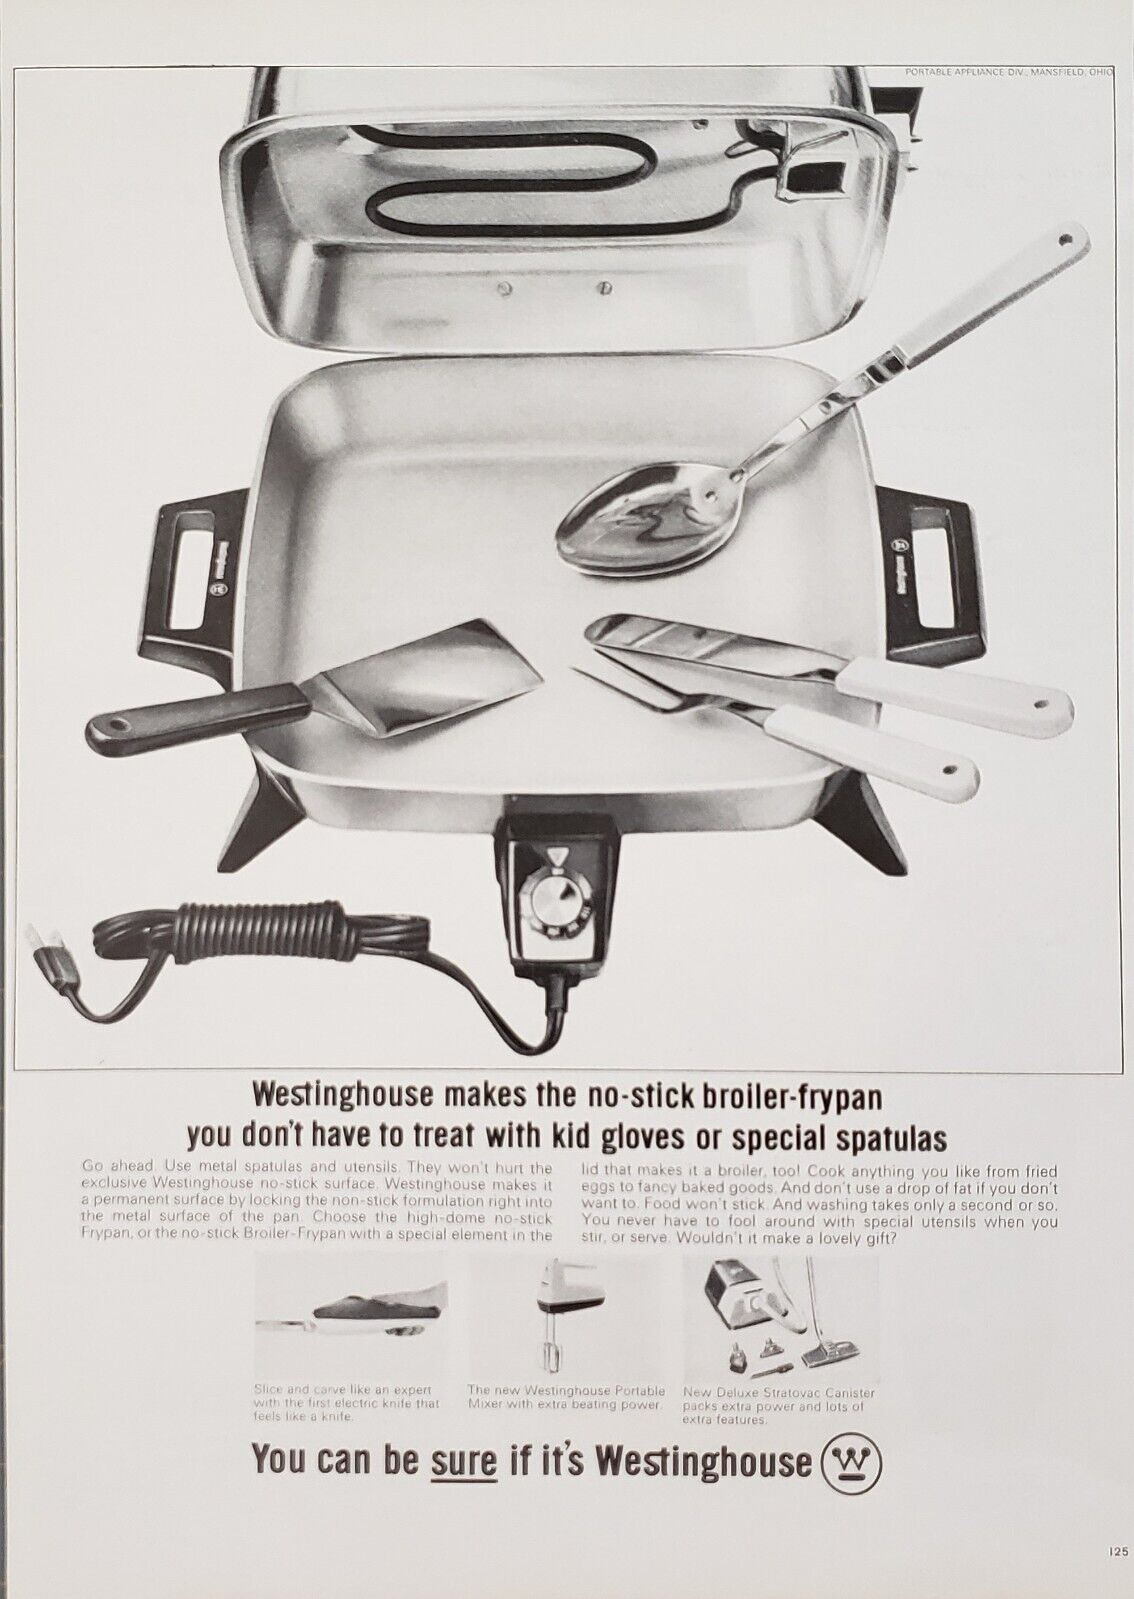 1965 Westinghouse Broiler Frypan No Stick May Use Metal Utensils Print Ad